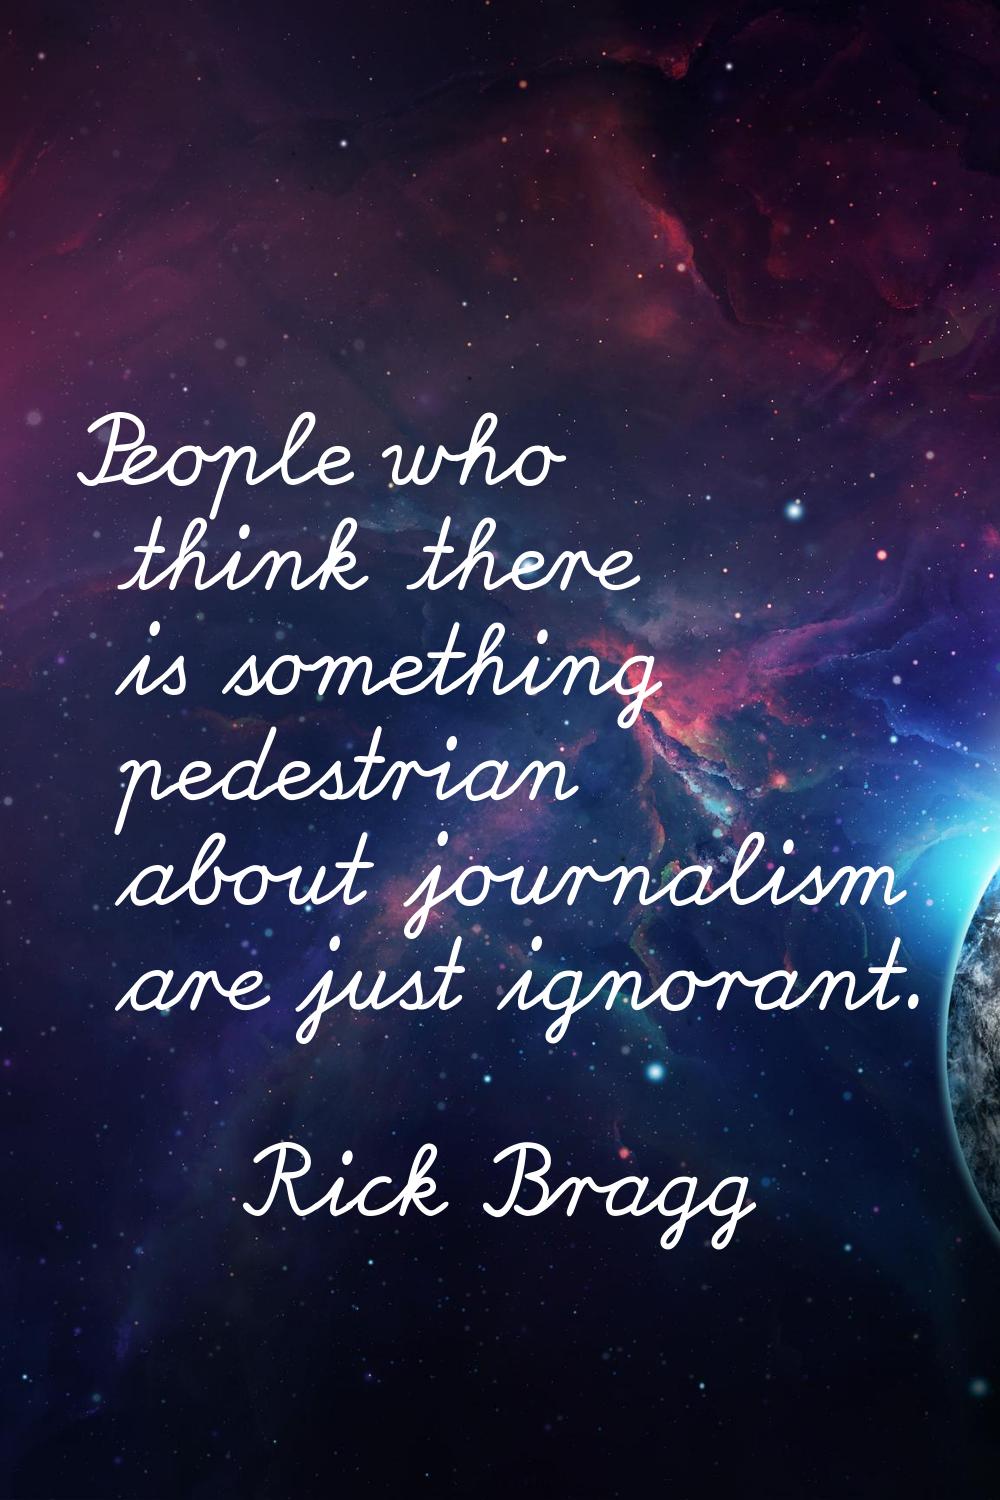 People who think there is something pedestrian about journalism are just ignorant.